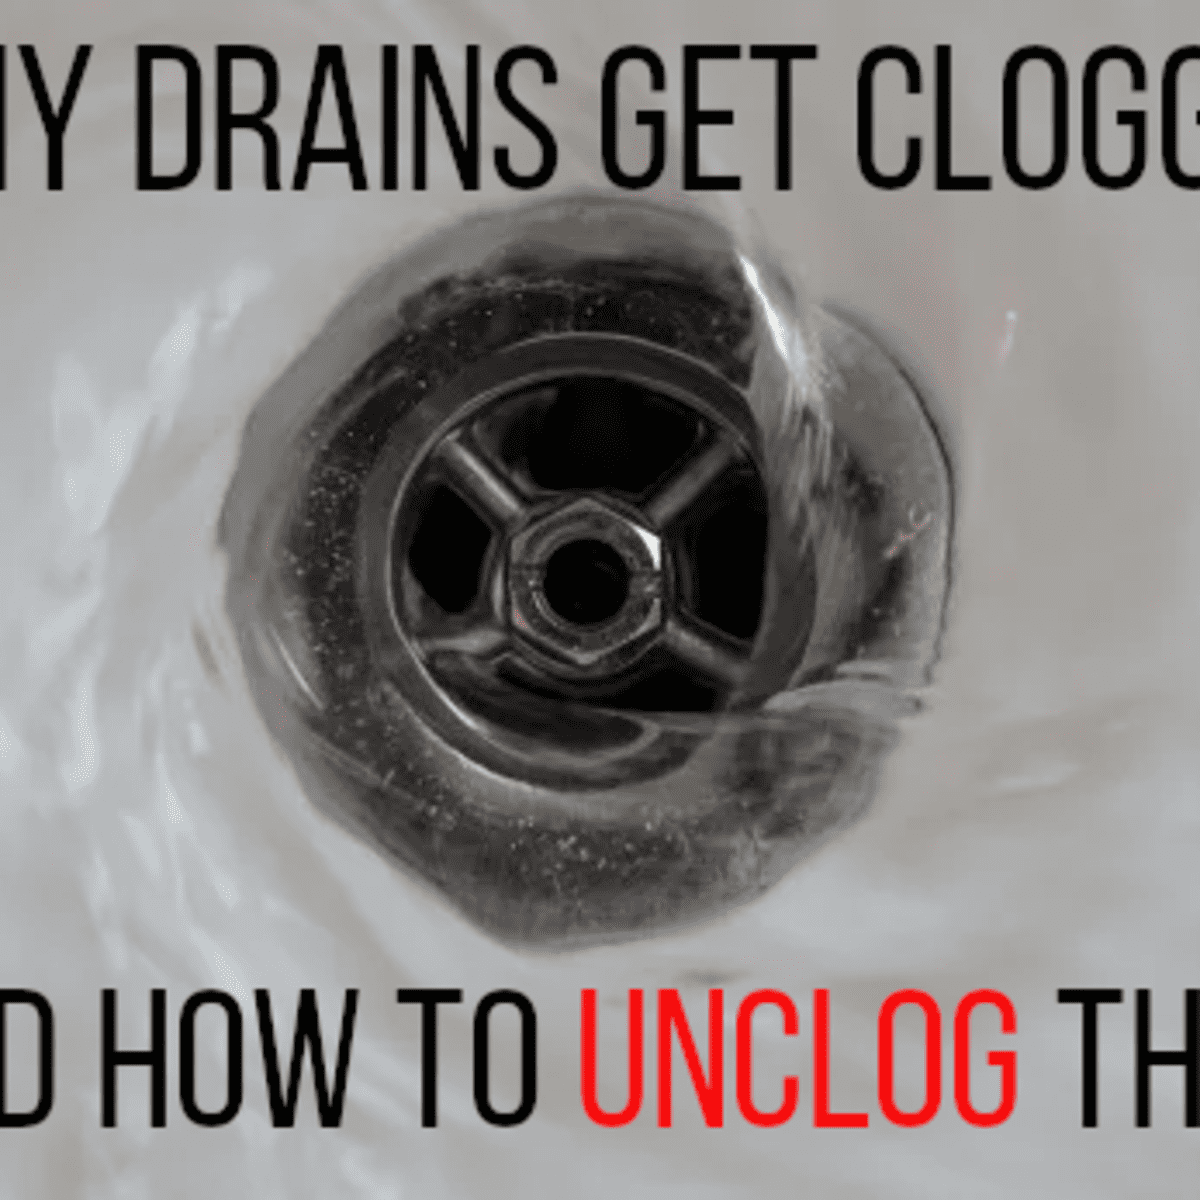 14 Common Causes Of Clogged Drains And, How To Clean Bathtub Drain Pipes